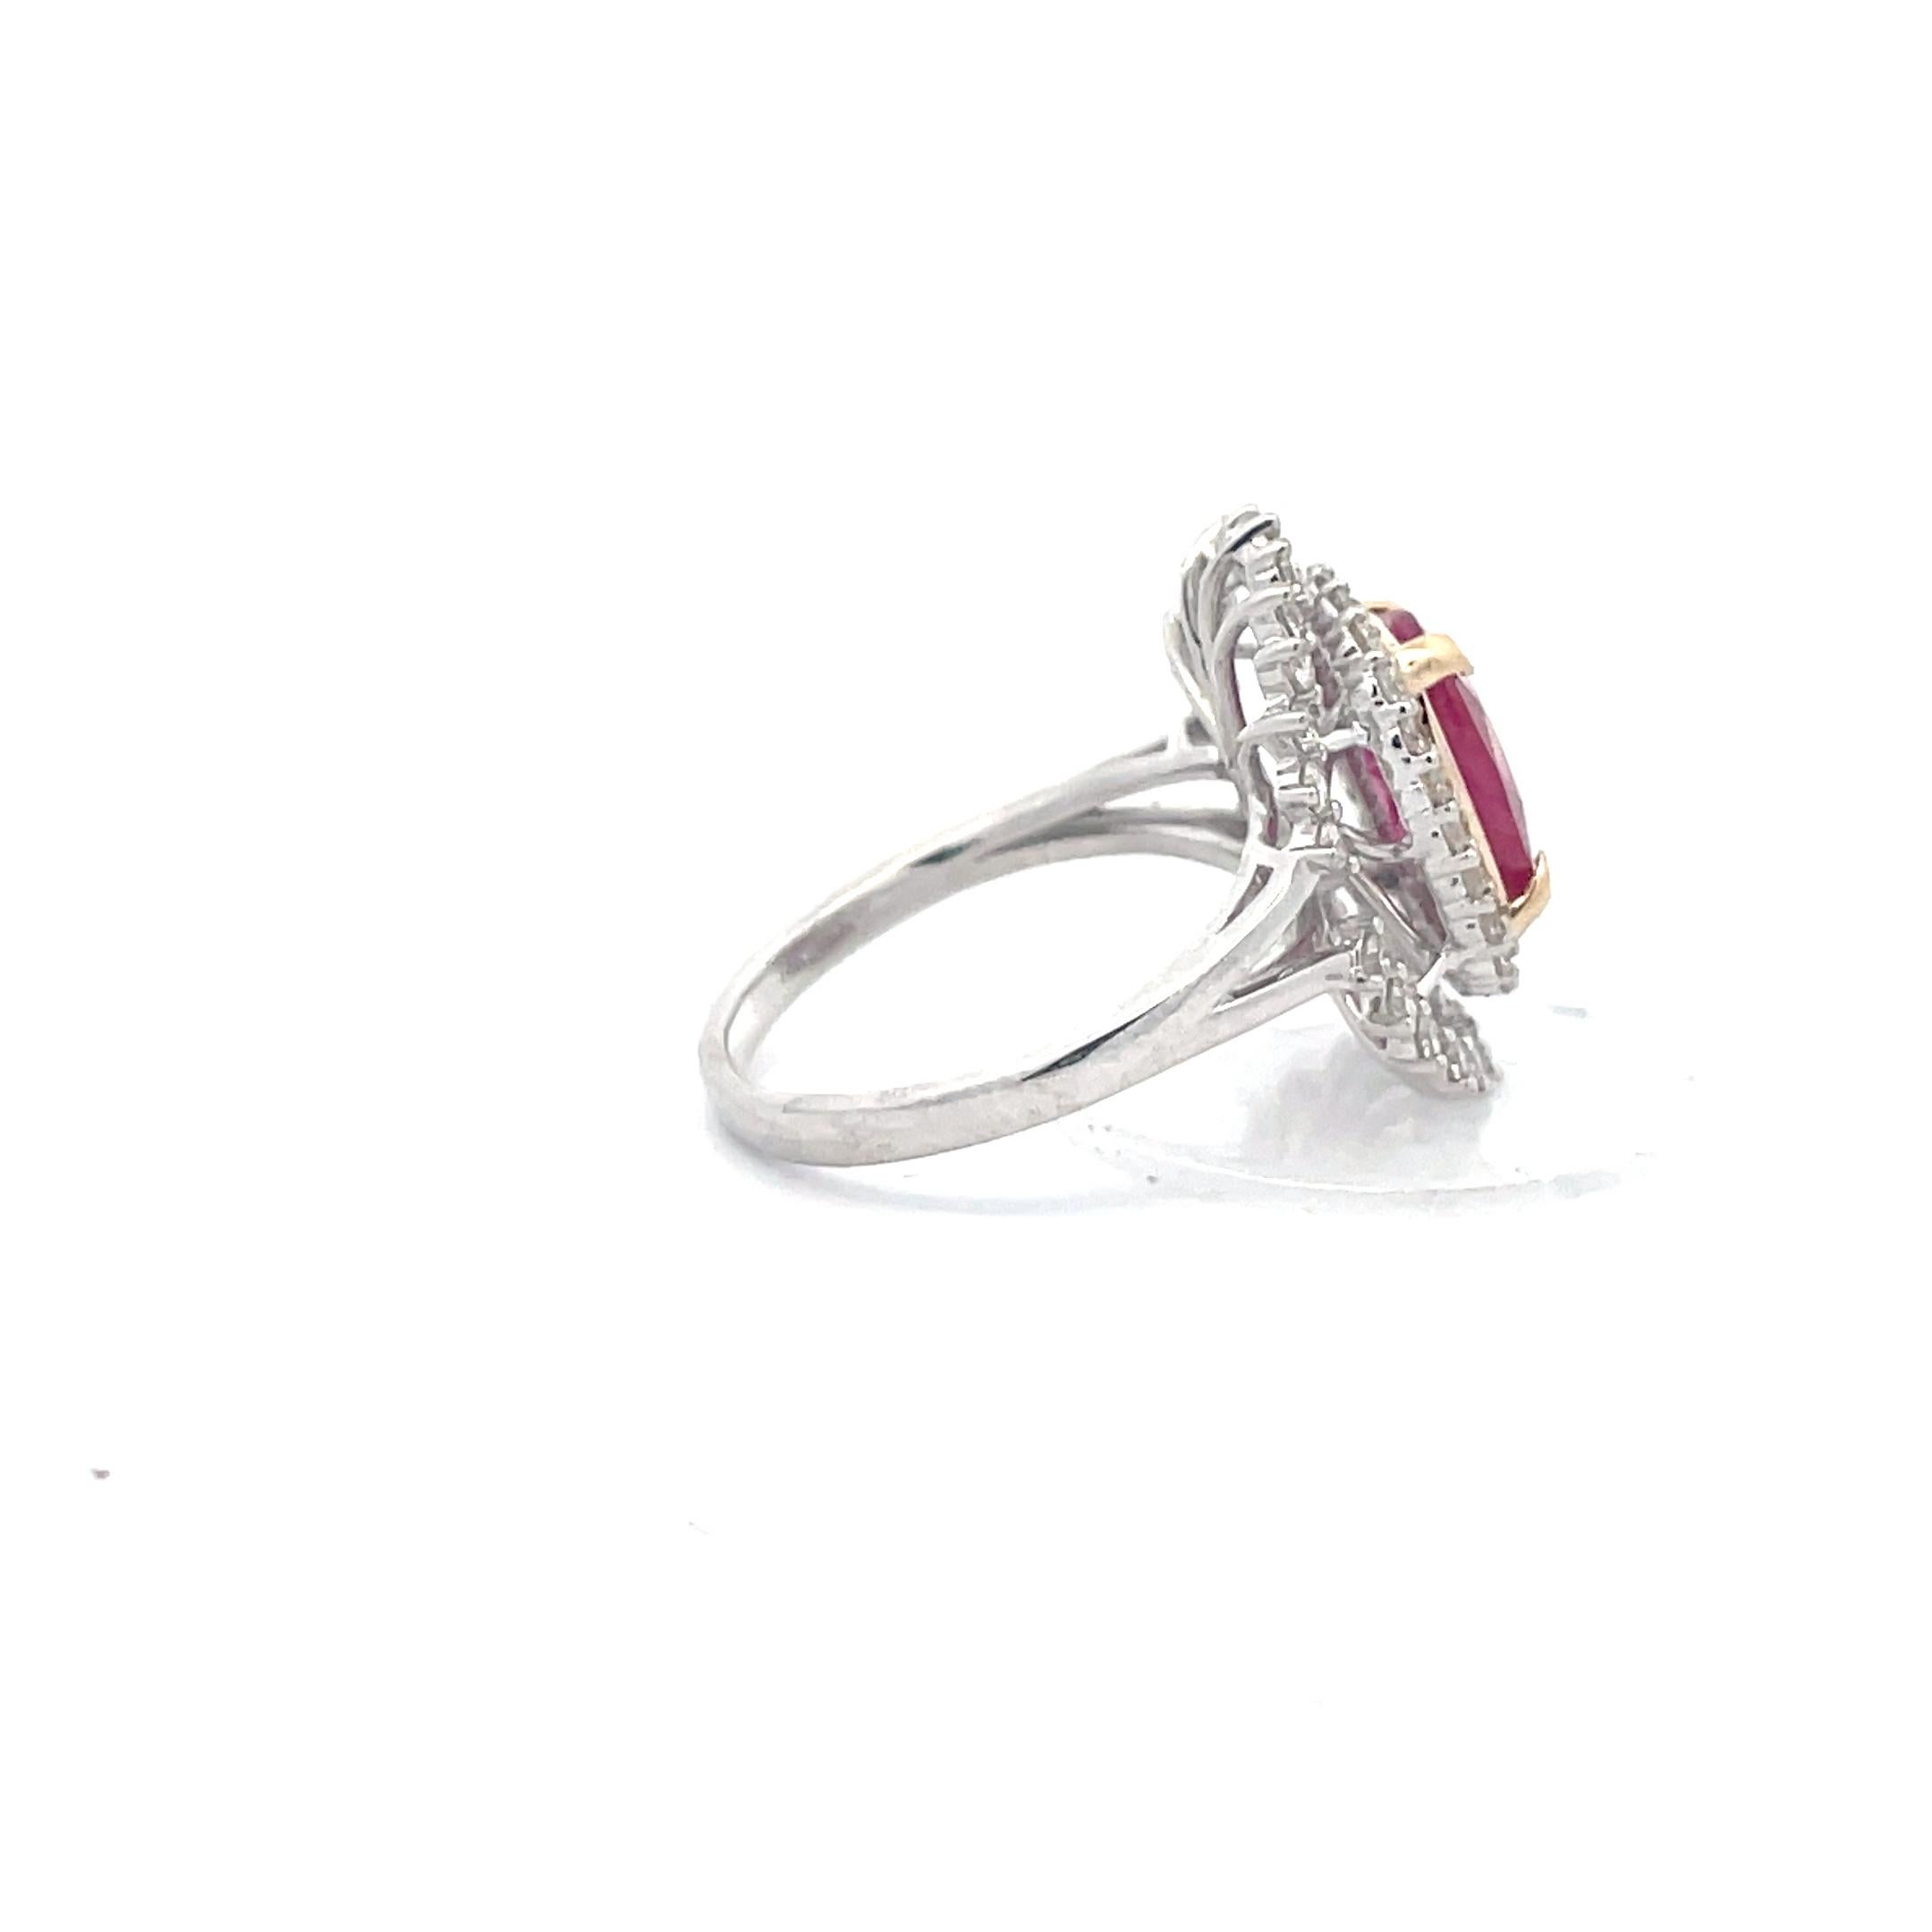 Art Deco 3.0 Ct. Oval Cut Ruby with Floral Diamond Cluster Engagement Ring in 14k Gold